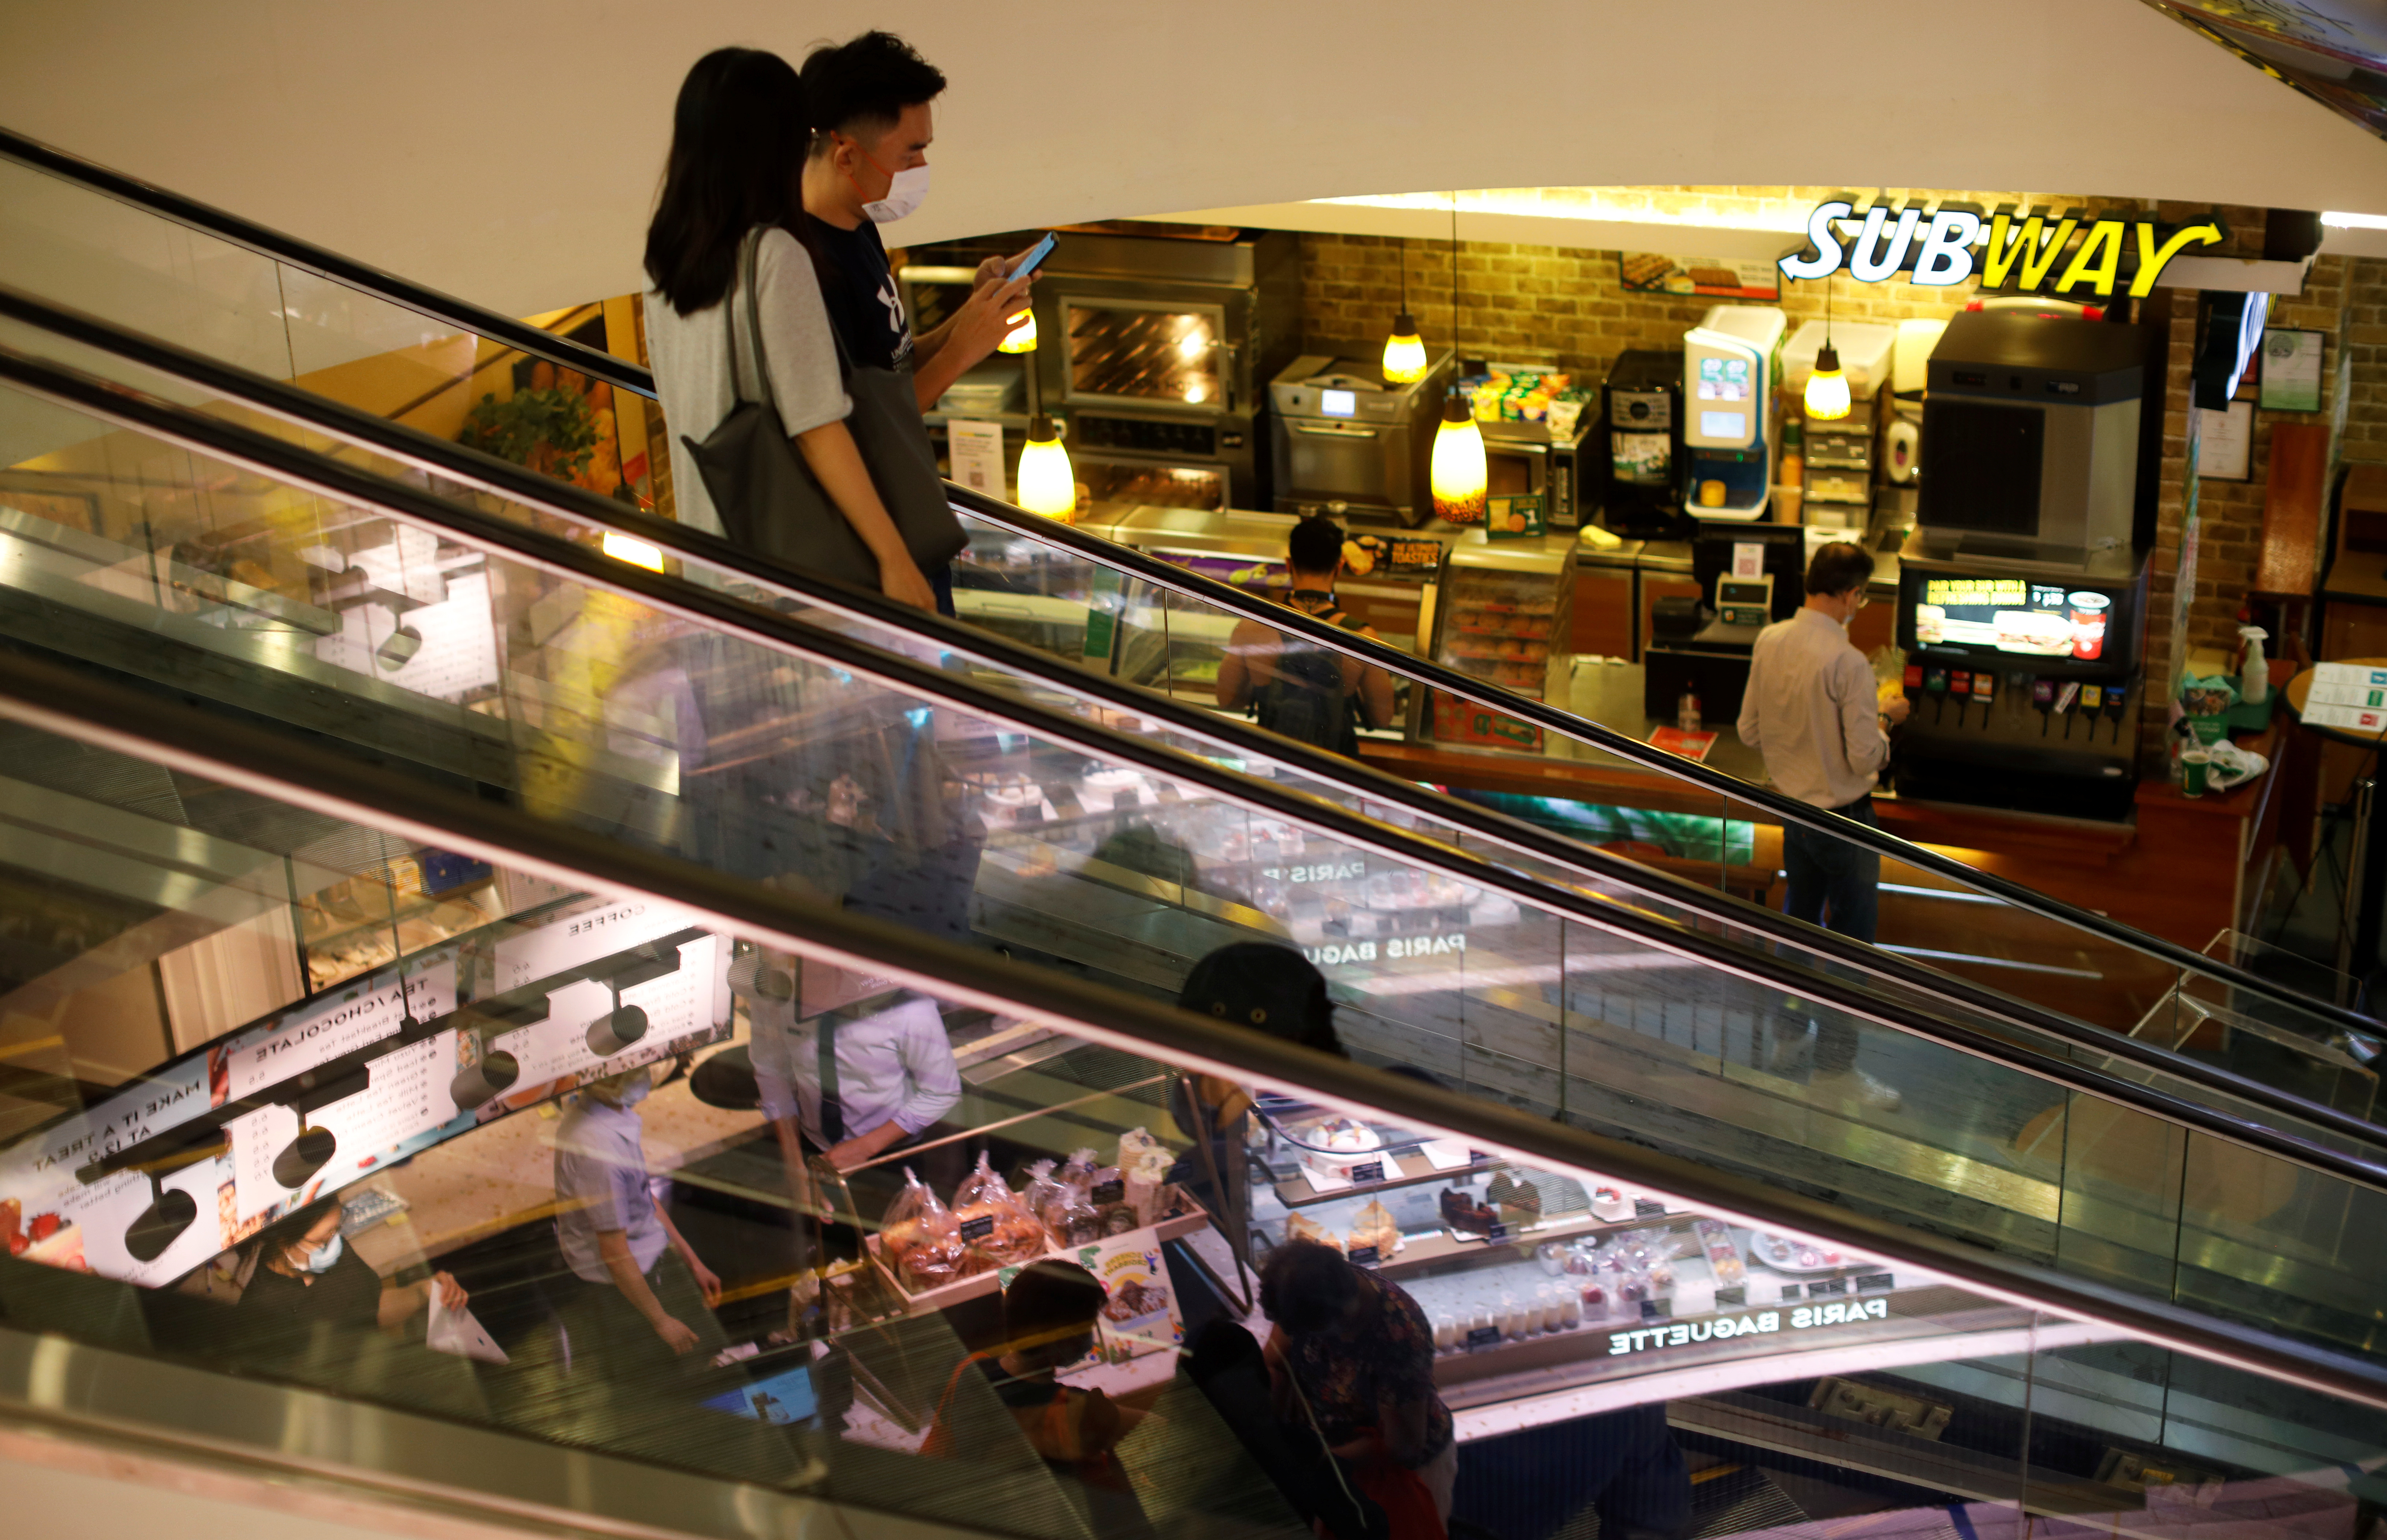 People wearing protective face masks ride an escalator at a shopping mall in Singapore